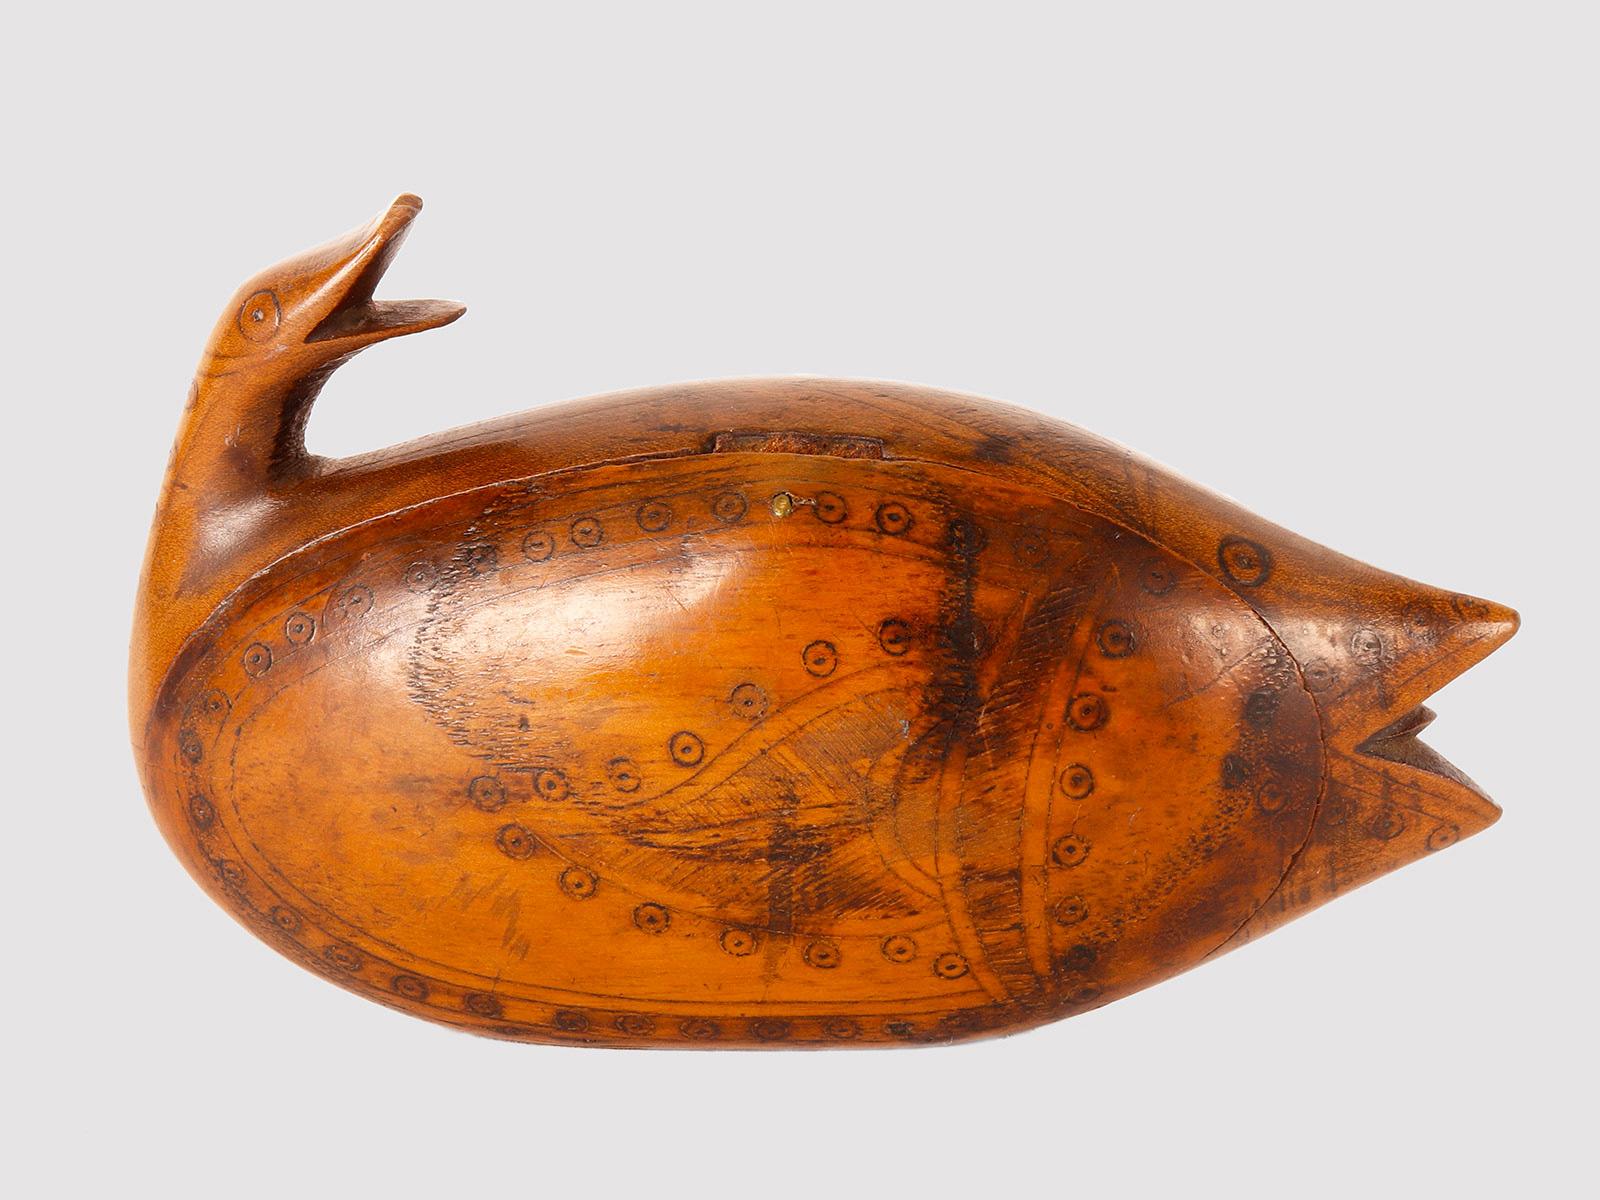 Scandinavian ink decorated treen wood fish shaped snuff box. The fishtail becomes a bird’s head with an open beak. This Scandinavian snuff box was made during the mid to late 19th century. The box is carved from treen wood and is pen-worked,